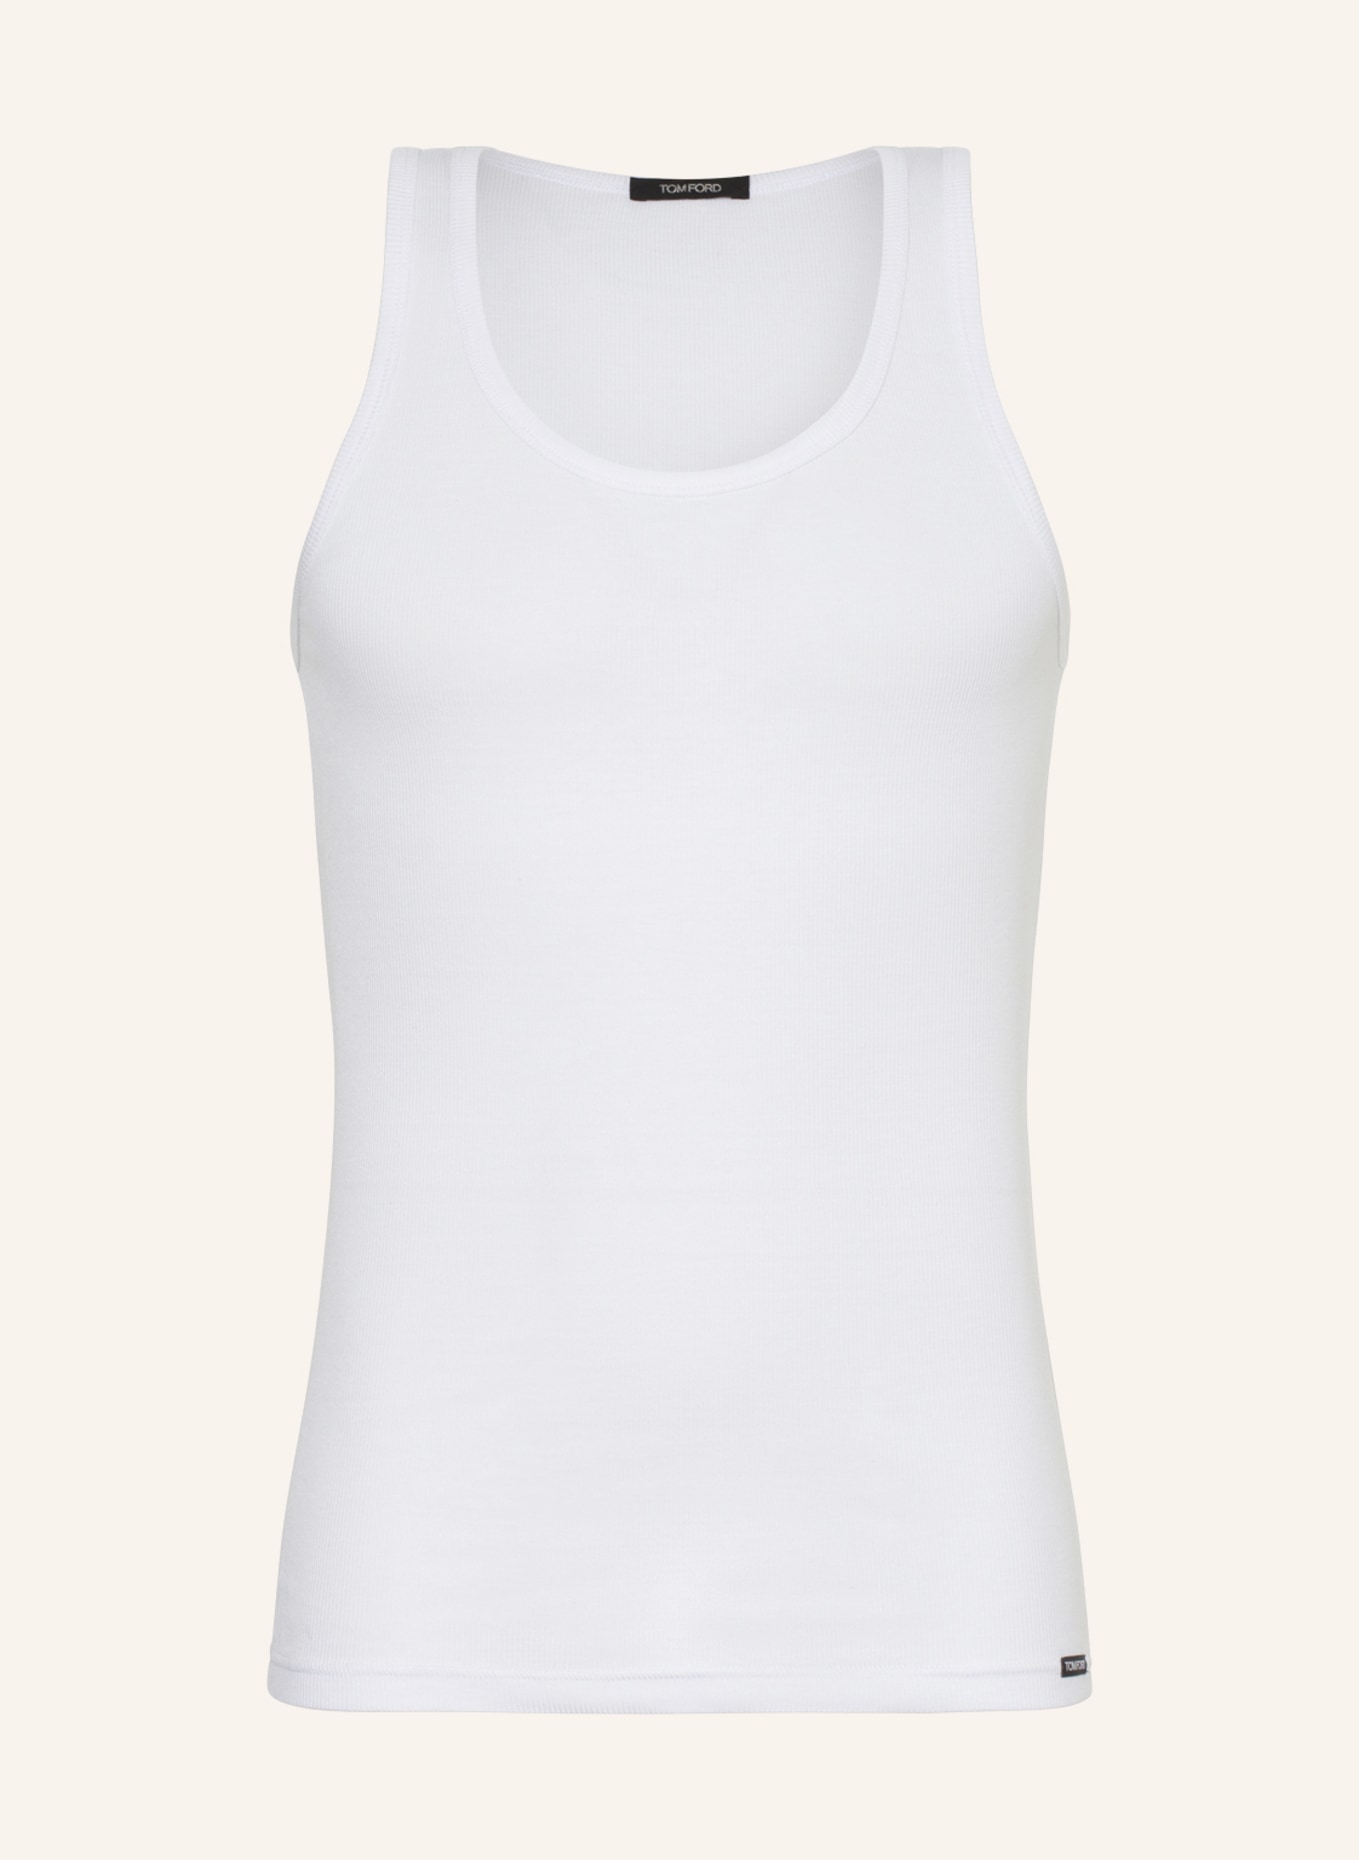 TOM FORD Undershirt, Color: WHITE (Image 1)